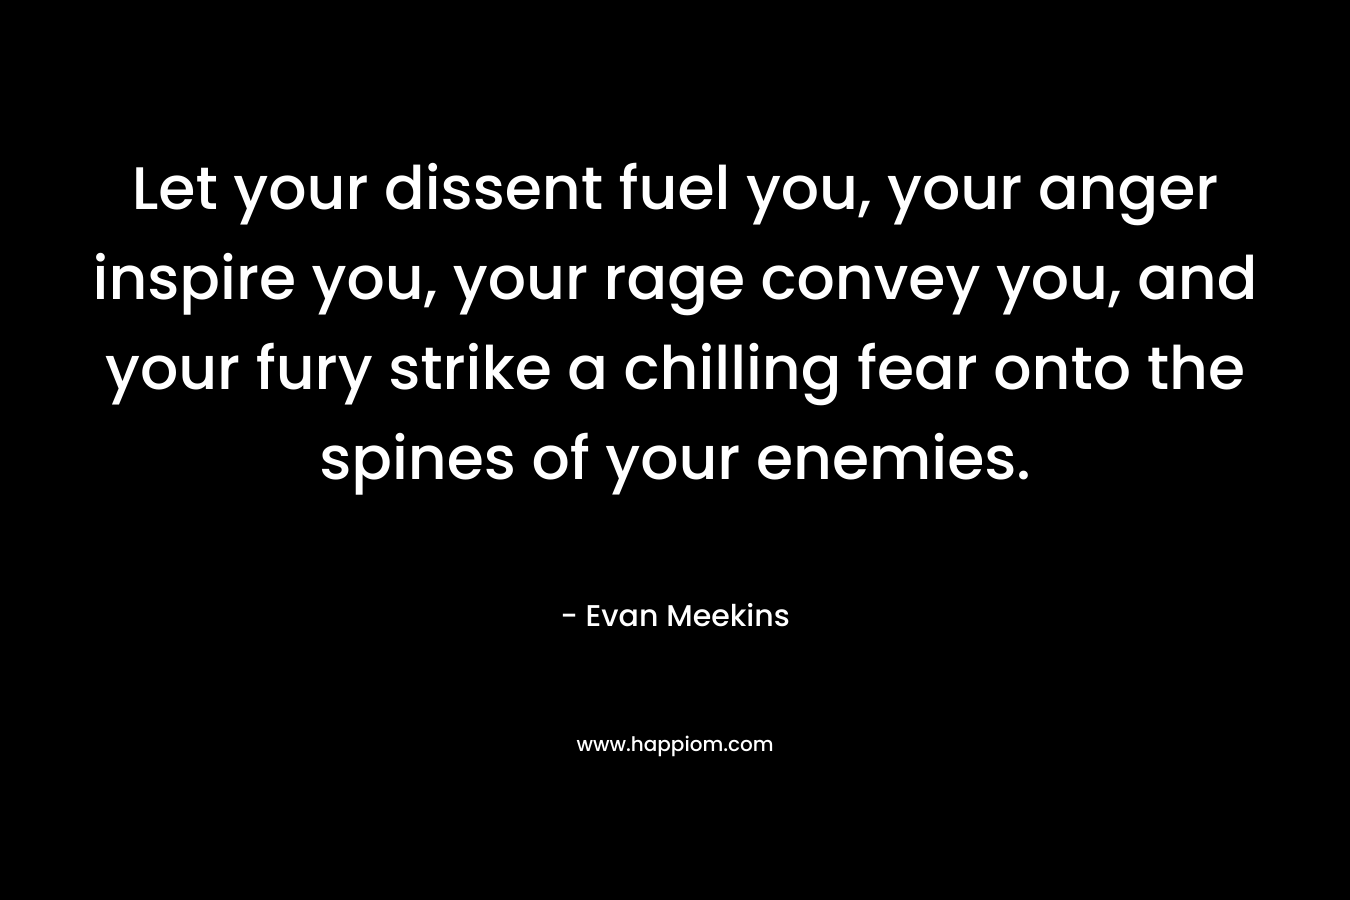 Let your dissent fuel you, your anger inspire you, your rage convey you, and your fury strike a chilling fear onto the spines of your enemies. – Evan Meekins